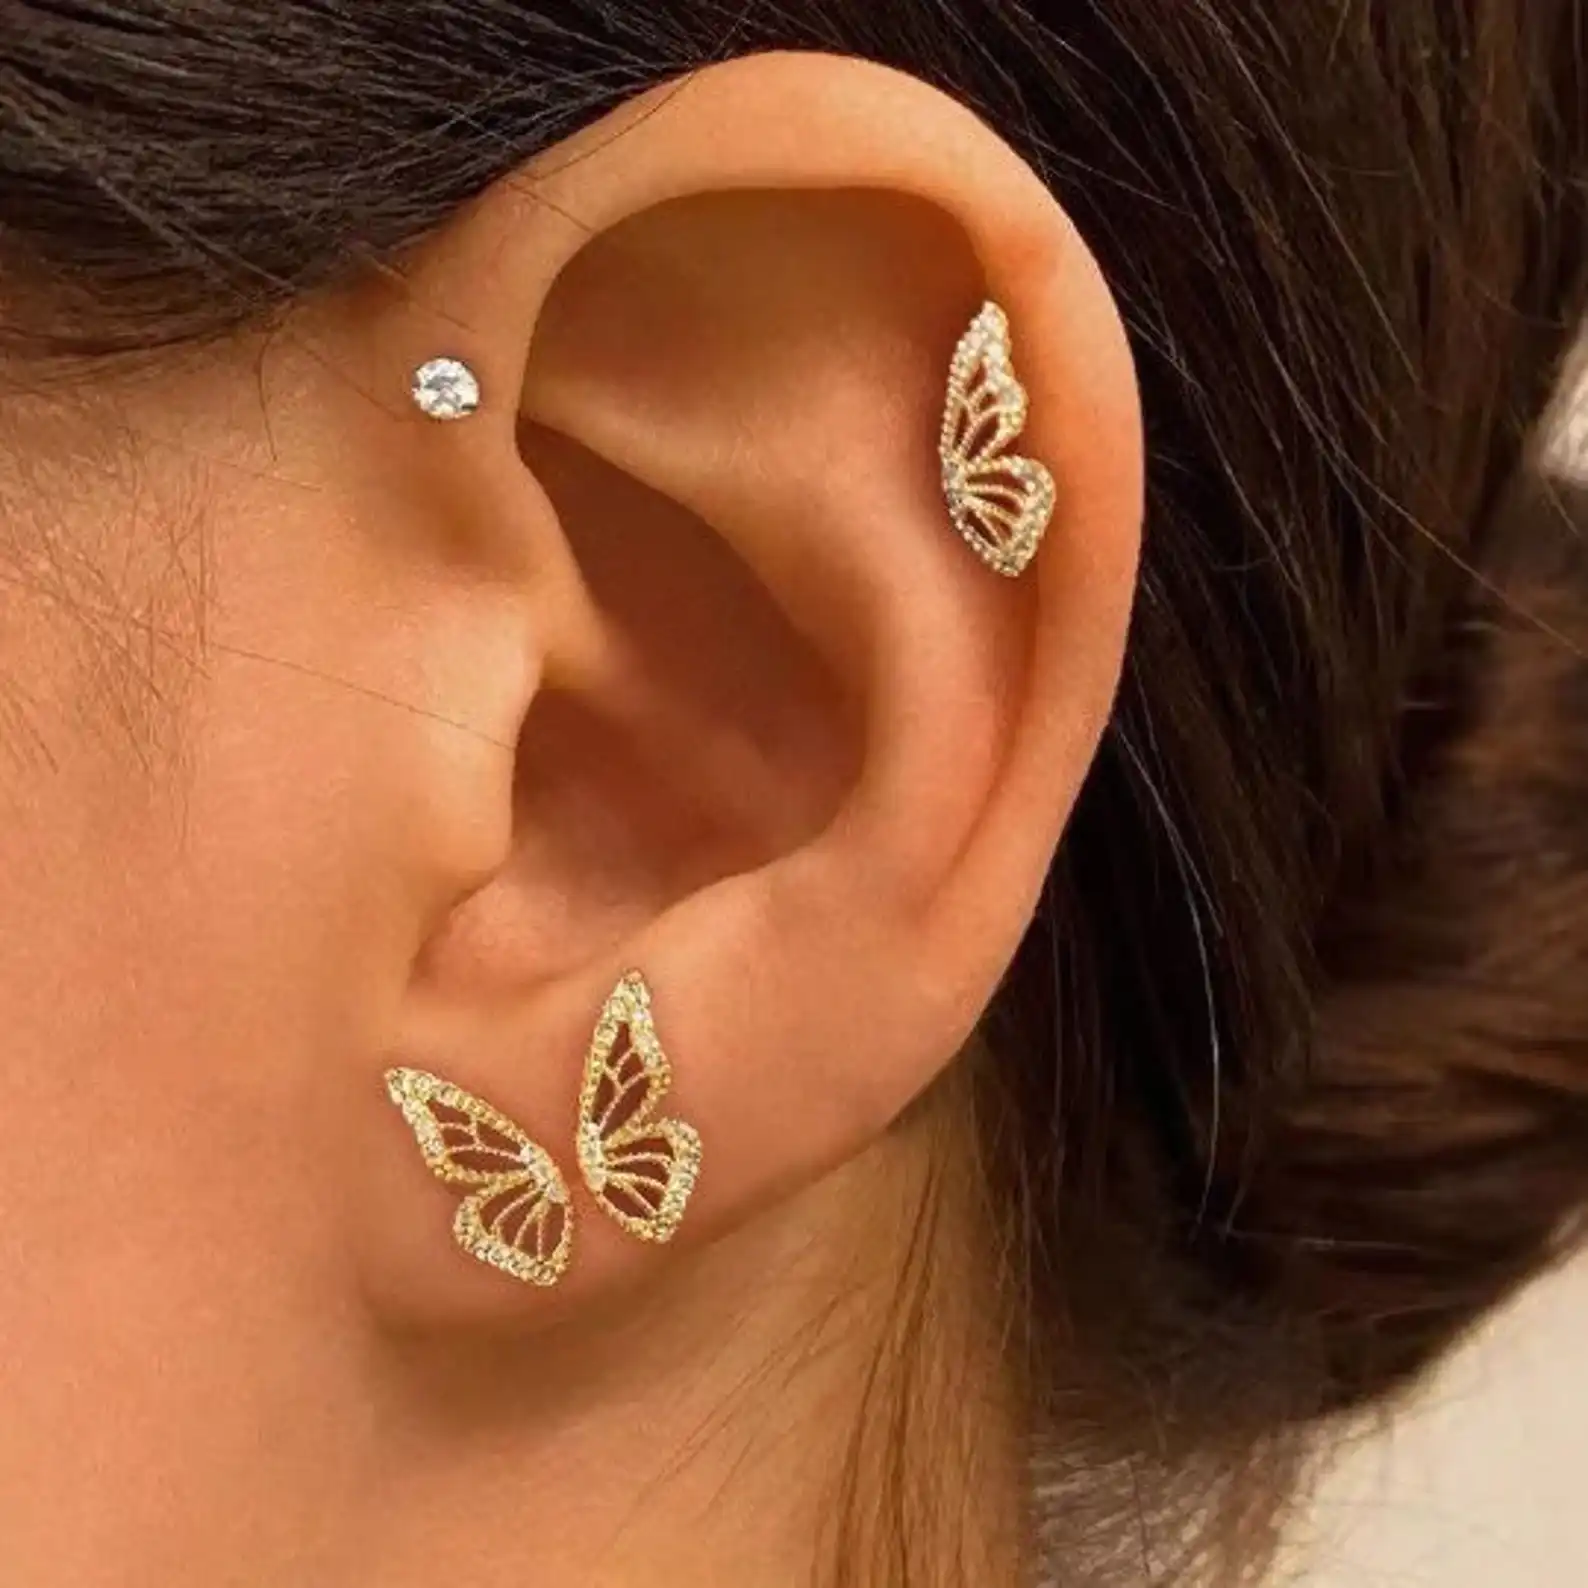 The Best Curated Ear Ideas  Medley Blog  Medley Jewellery